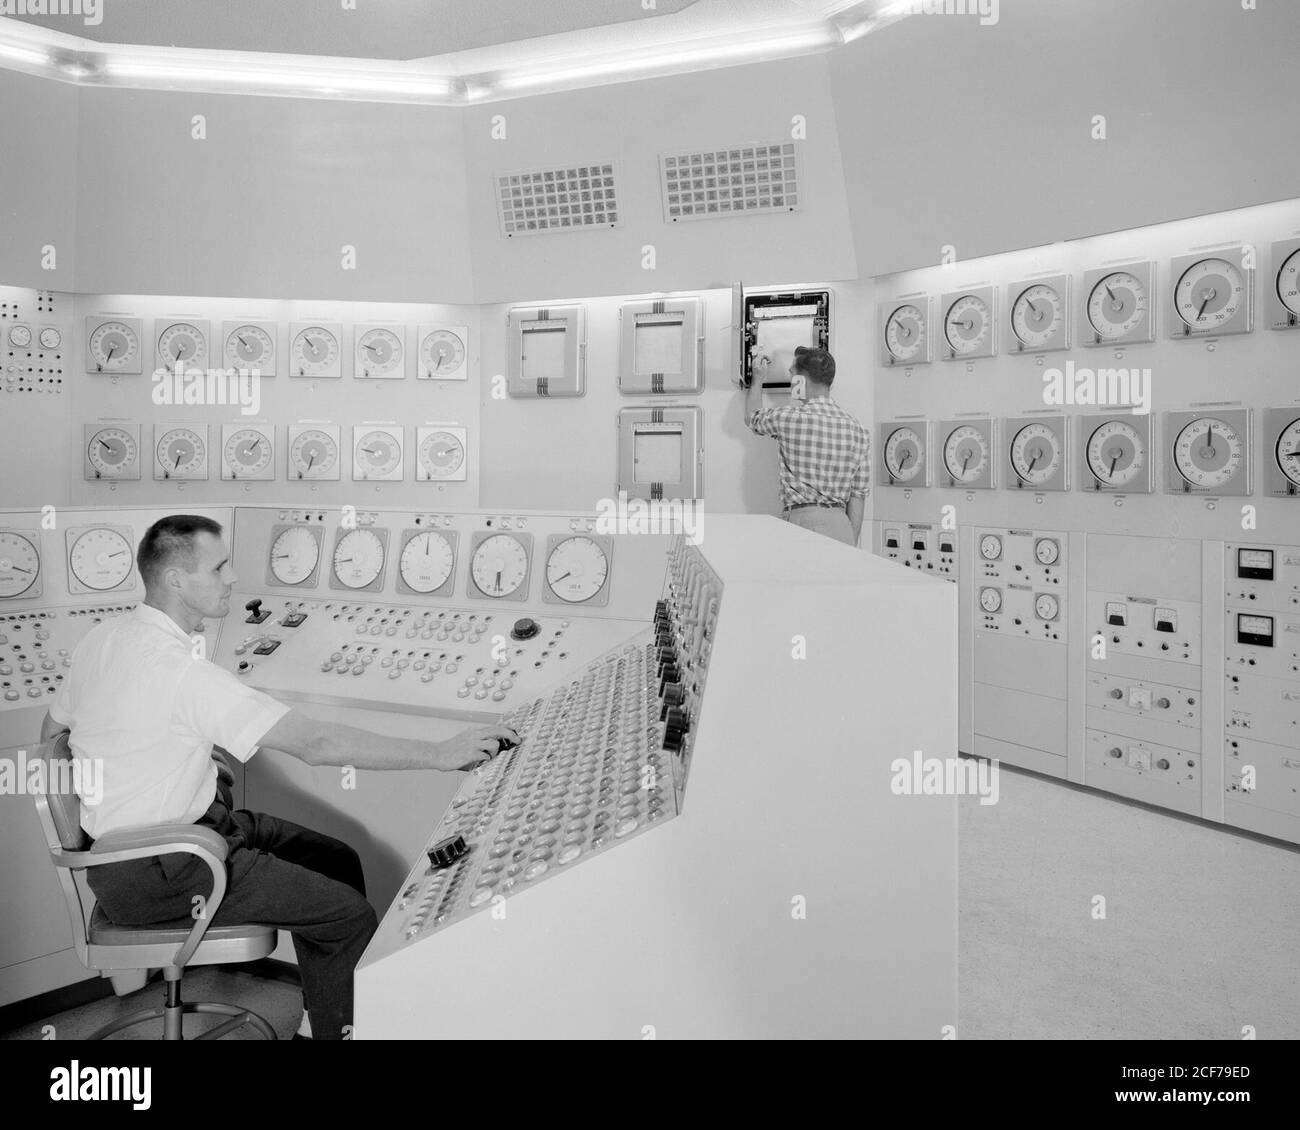 Bill Fecych (seated) and Don Johnson work in the reactor control room during its operating days in 1959. After an ad hoc committee study in 1977, NASA Headquarters decided that the reactor would never be put back into operation. Reactor equipment was then 'cannibalized' for other programs. Stock Photo